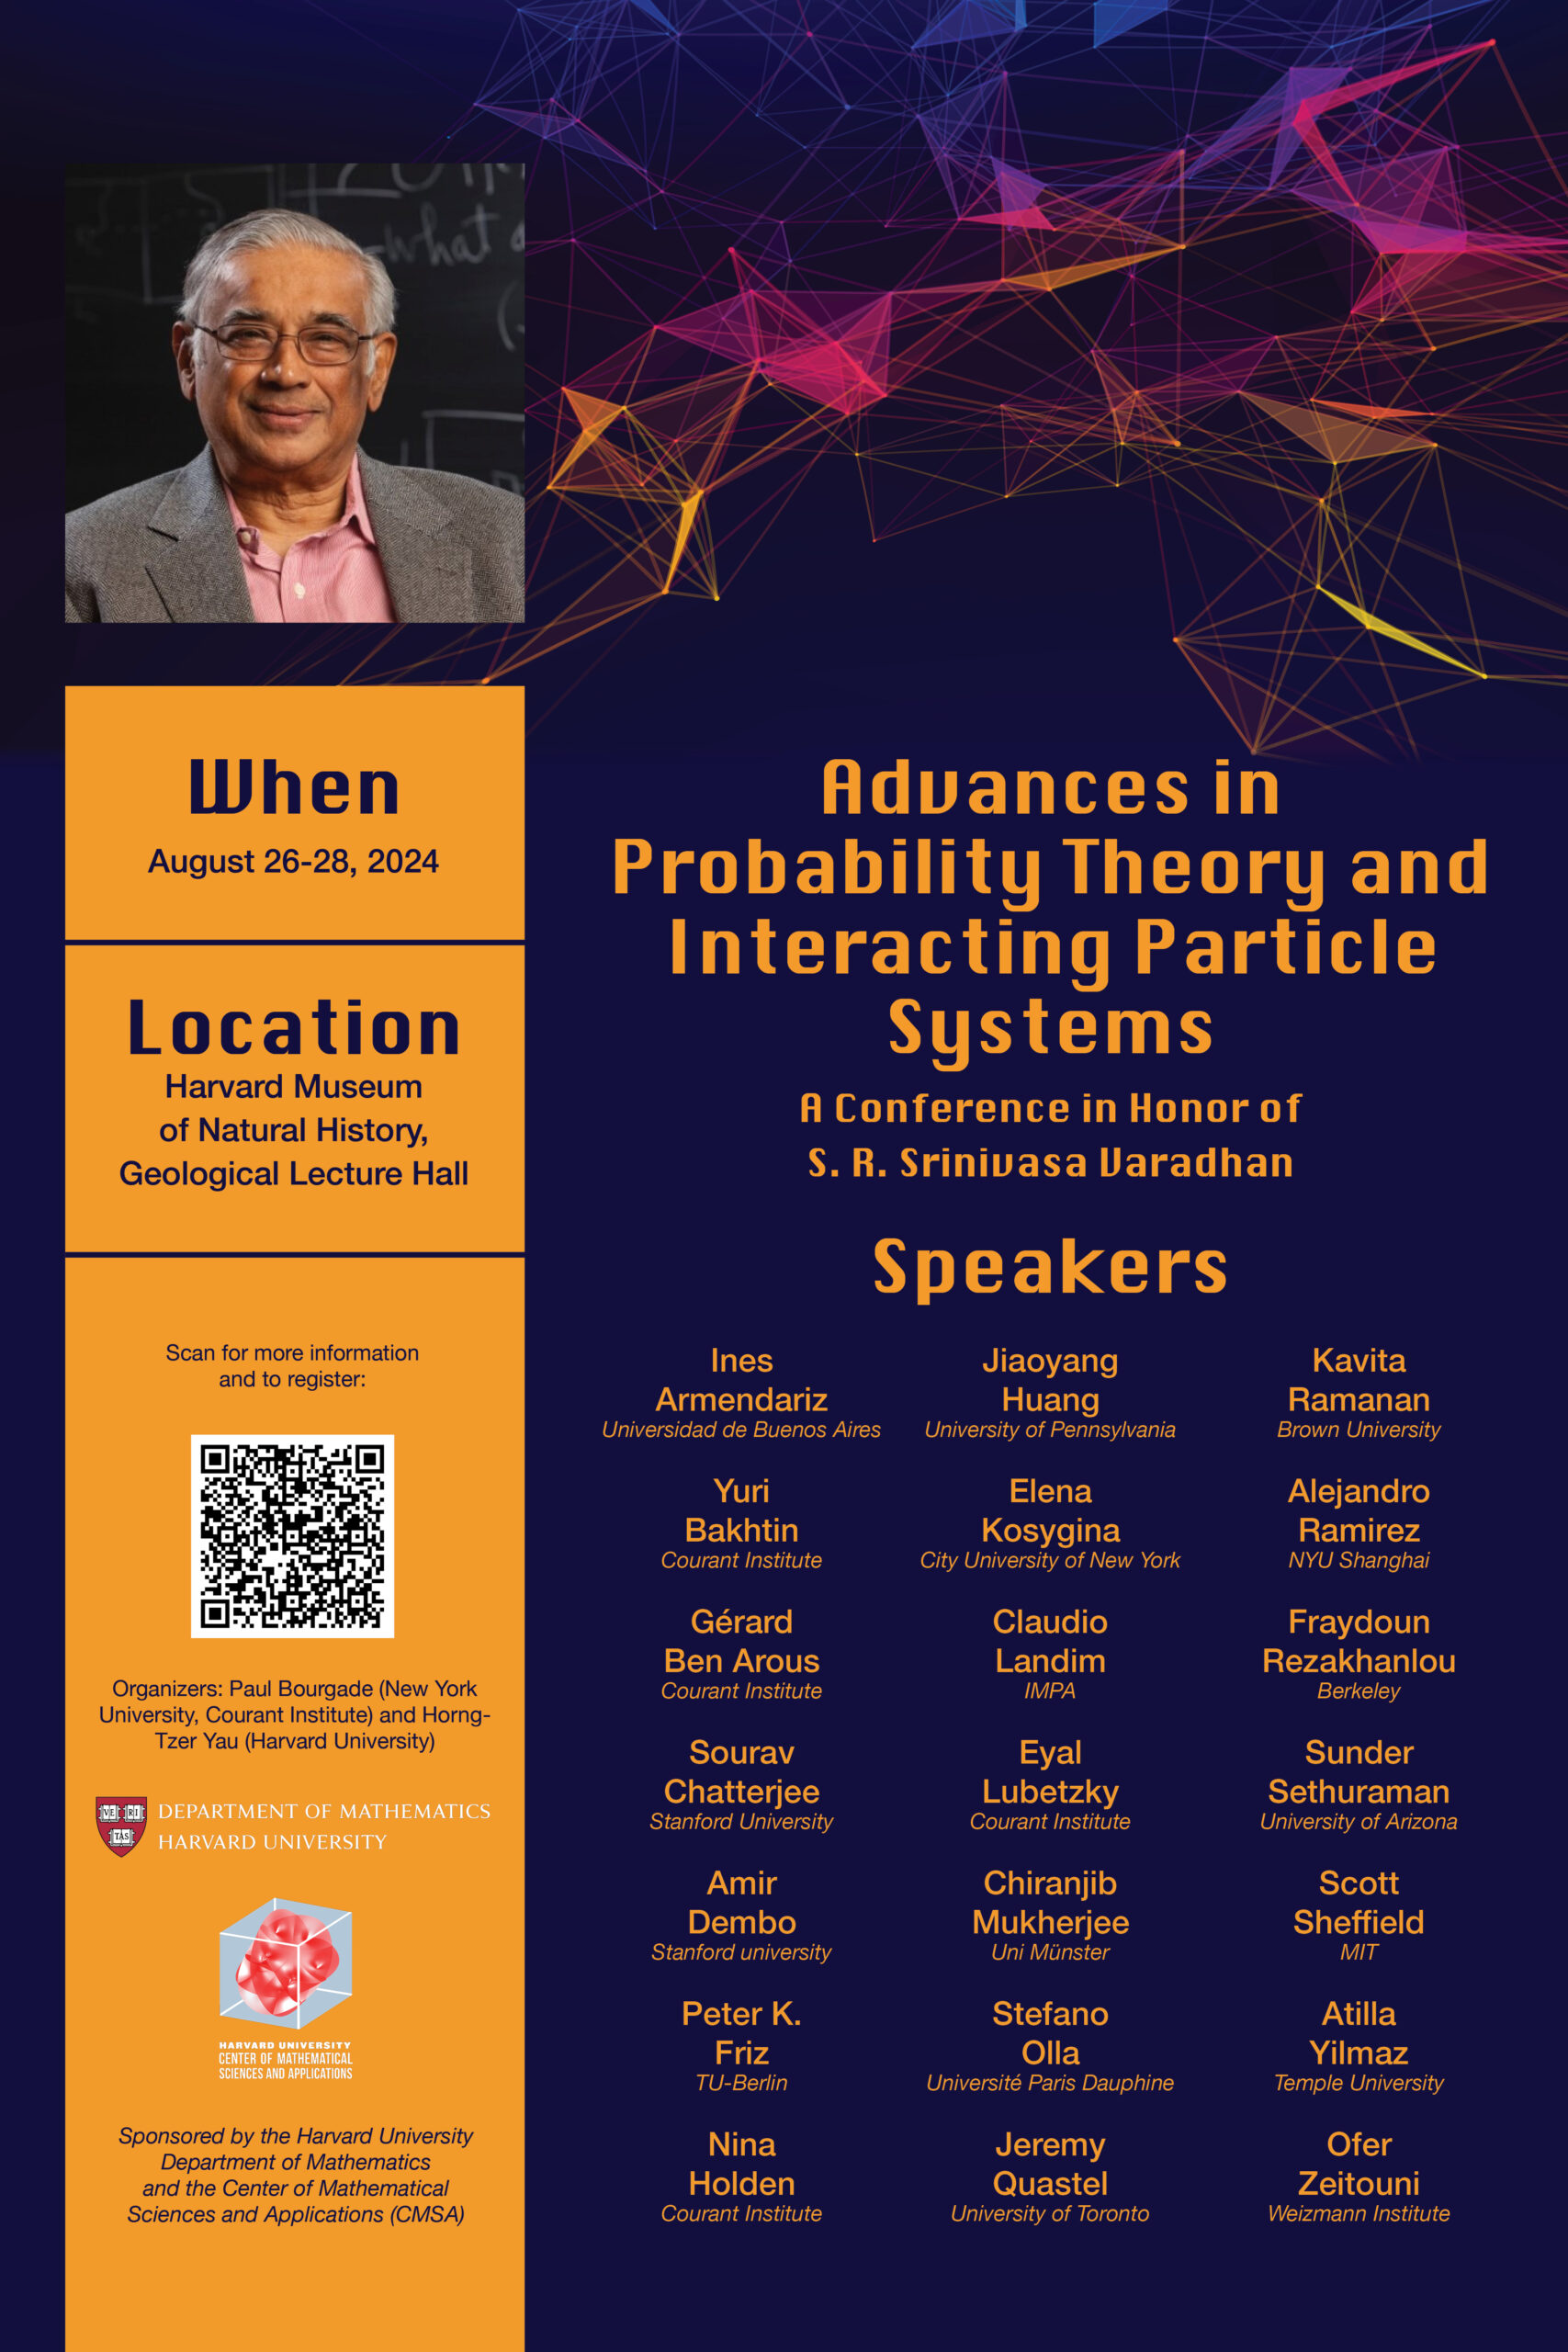 A poster about a conference in honor of mathematician S. R. Srinivasa Varadhan's birthday.